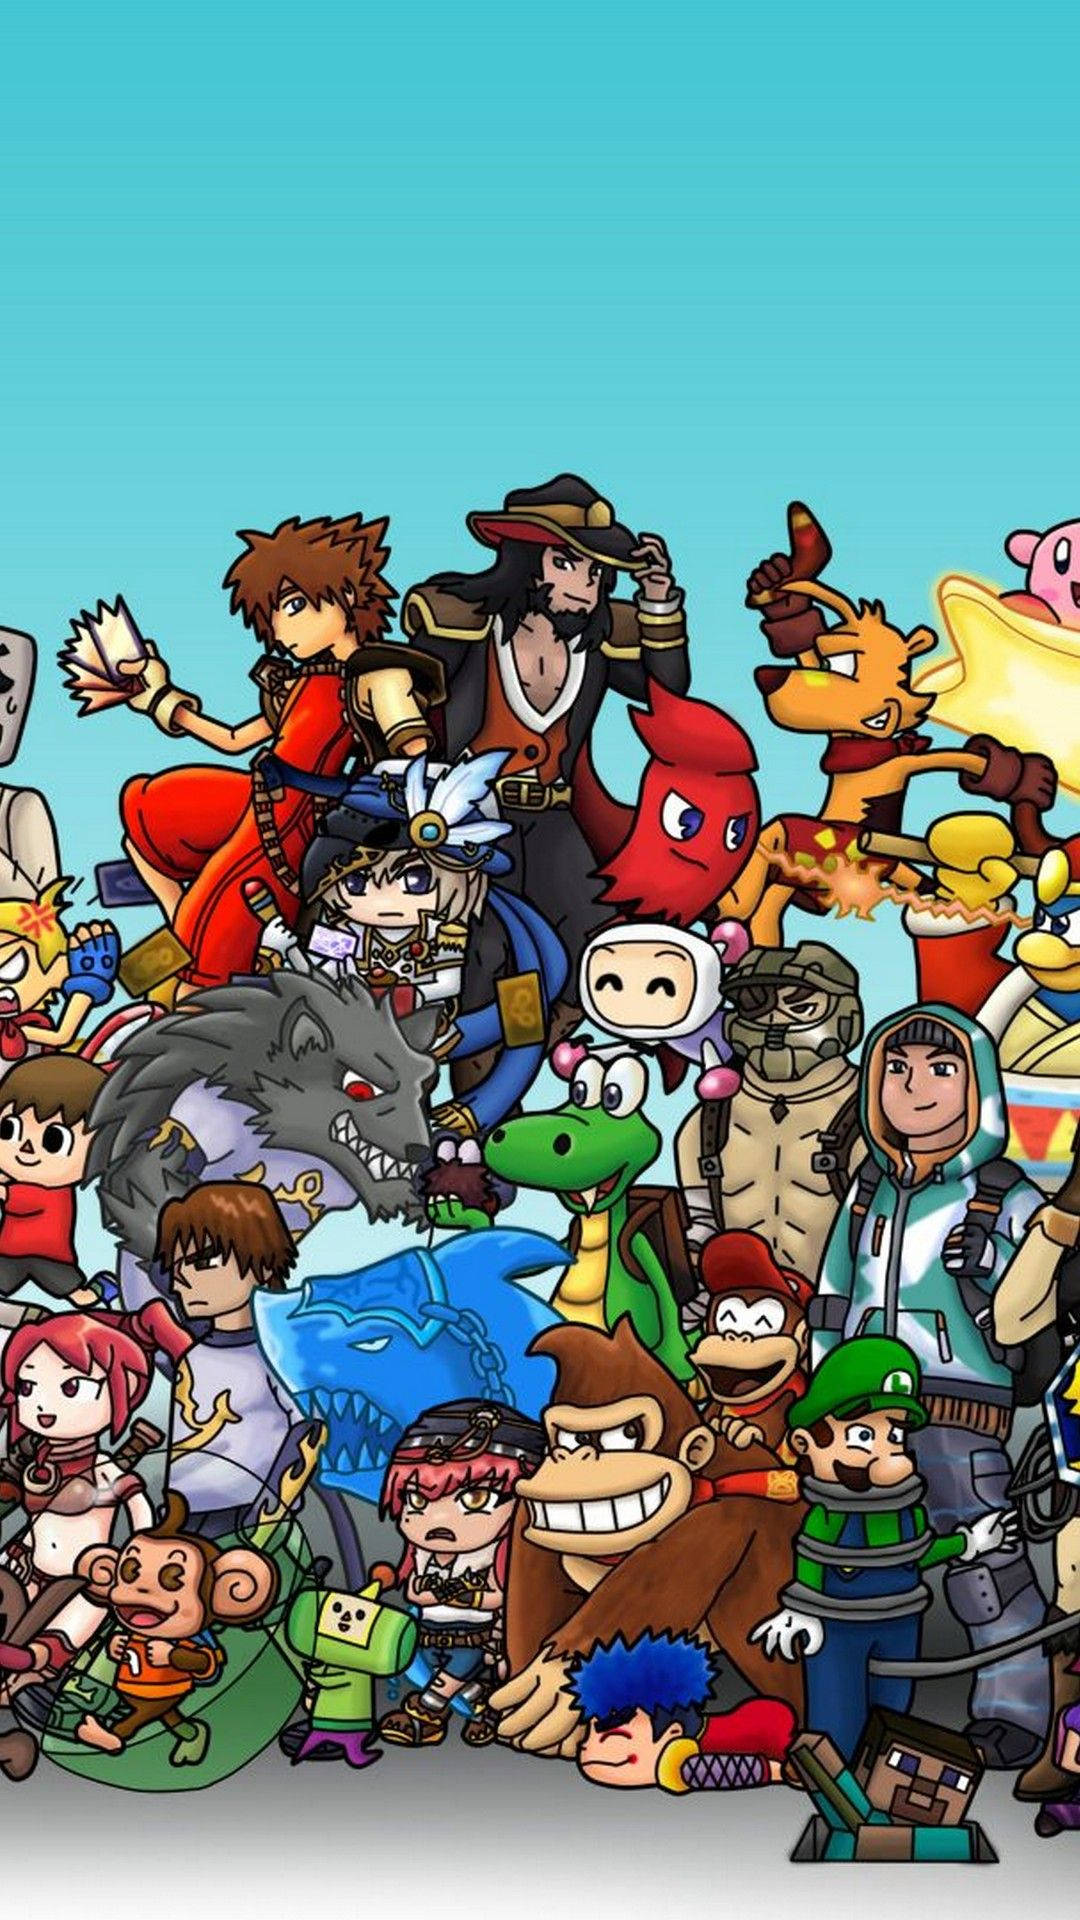 Epic Battle: Android Gaming Characters